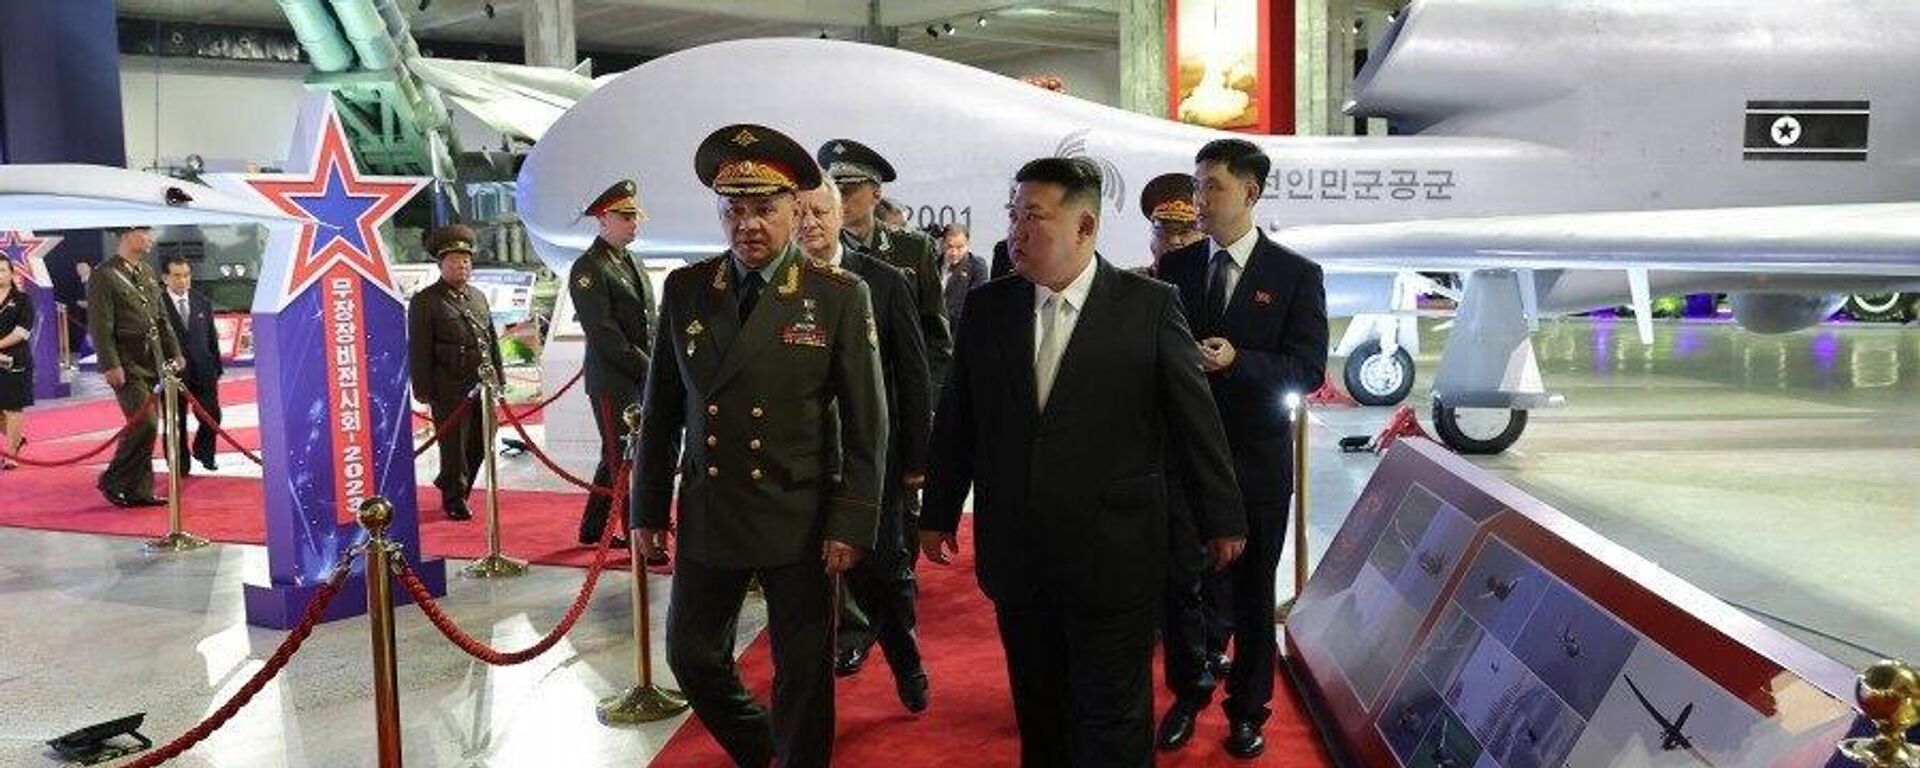 Kim Jong-un showed Russian Defense Minister Sergei Shoigu the new DPRK drones during their visit to an exhibition of weapons and equipment - Sputnik International, 1920, 27.07.2023